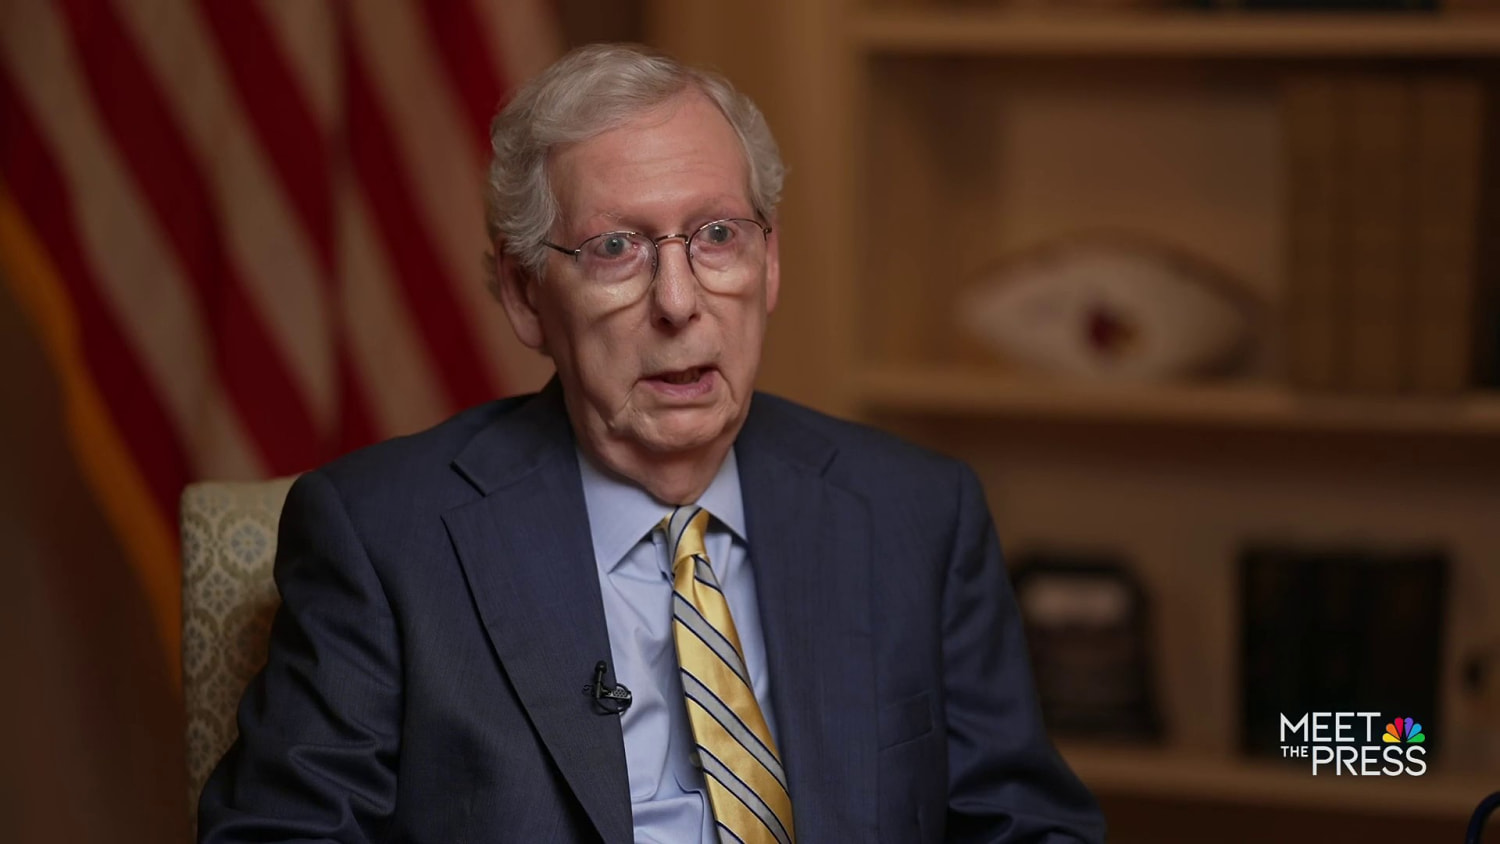 McConnell says he stands by ‘everything’ he said after January 6th